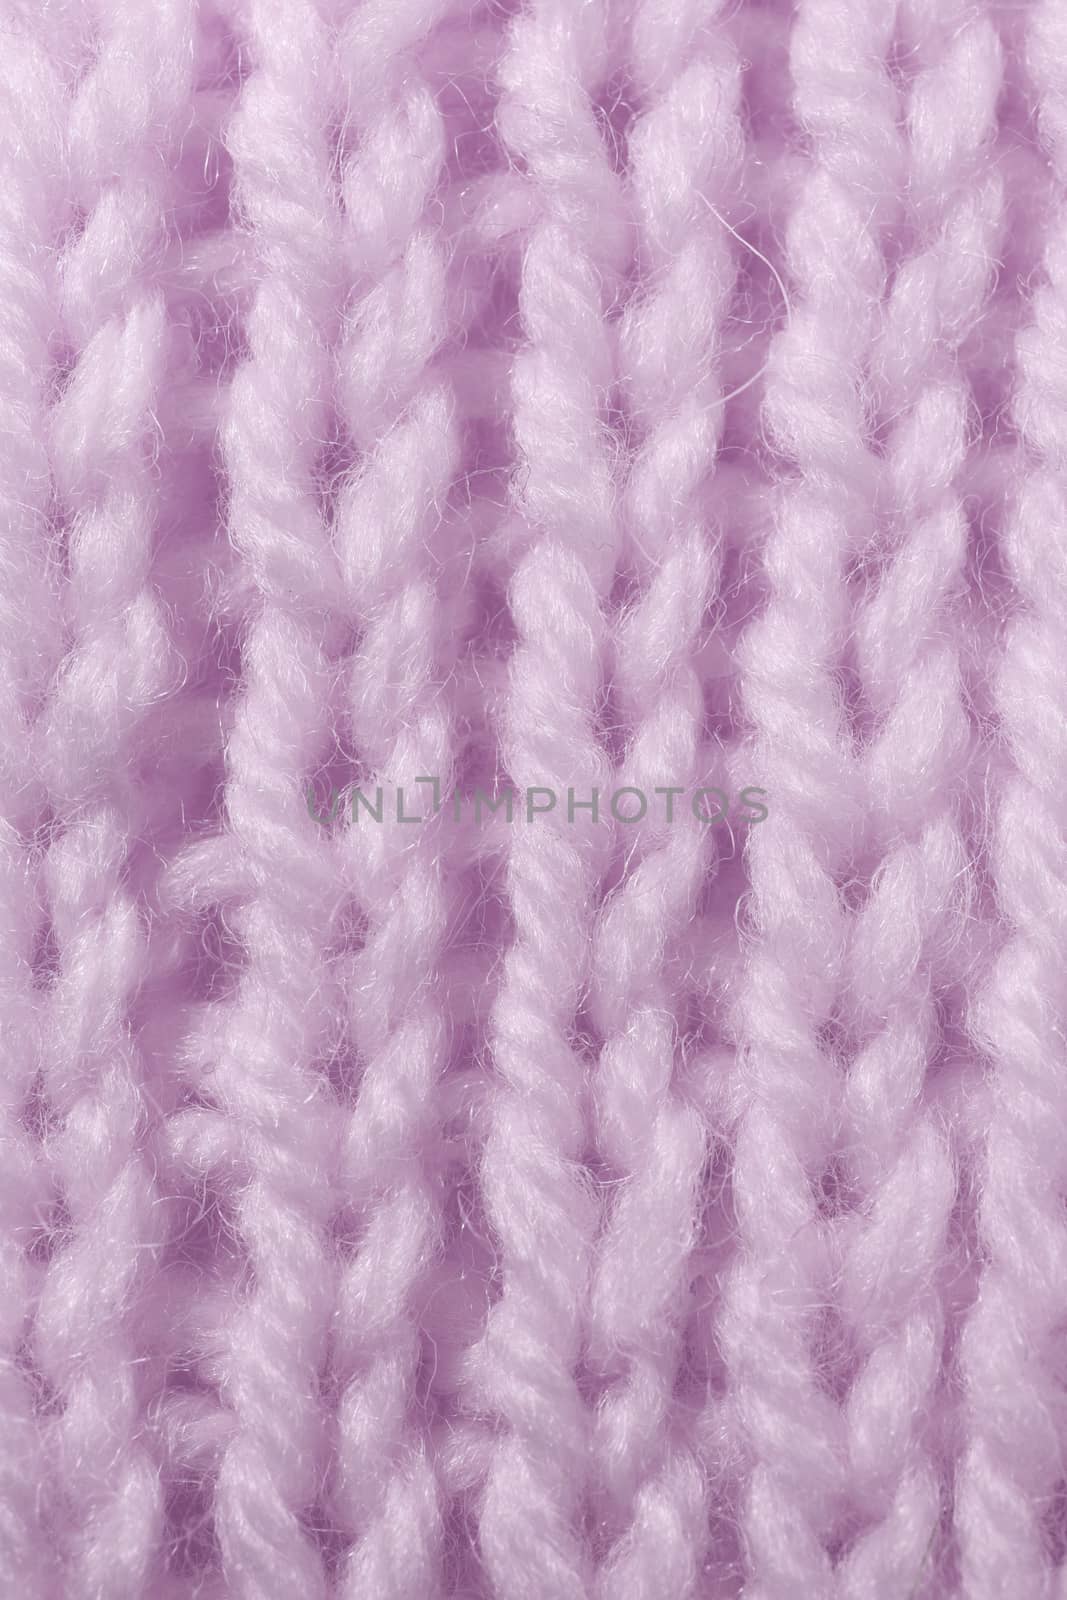 Lilac Wool Knitting Texture. Vertical Across Weaving Crochet Detailed Rows. Sweater Textile Background. Macro Closeup. by sanches812